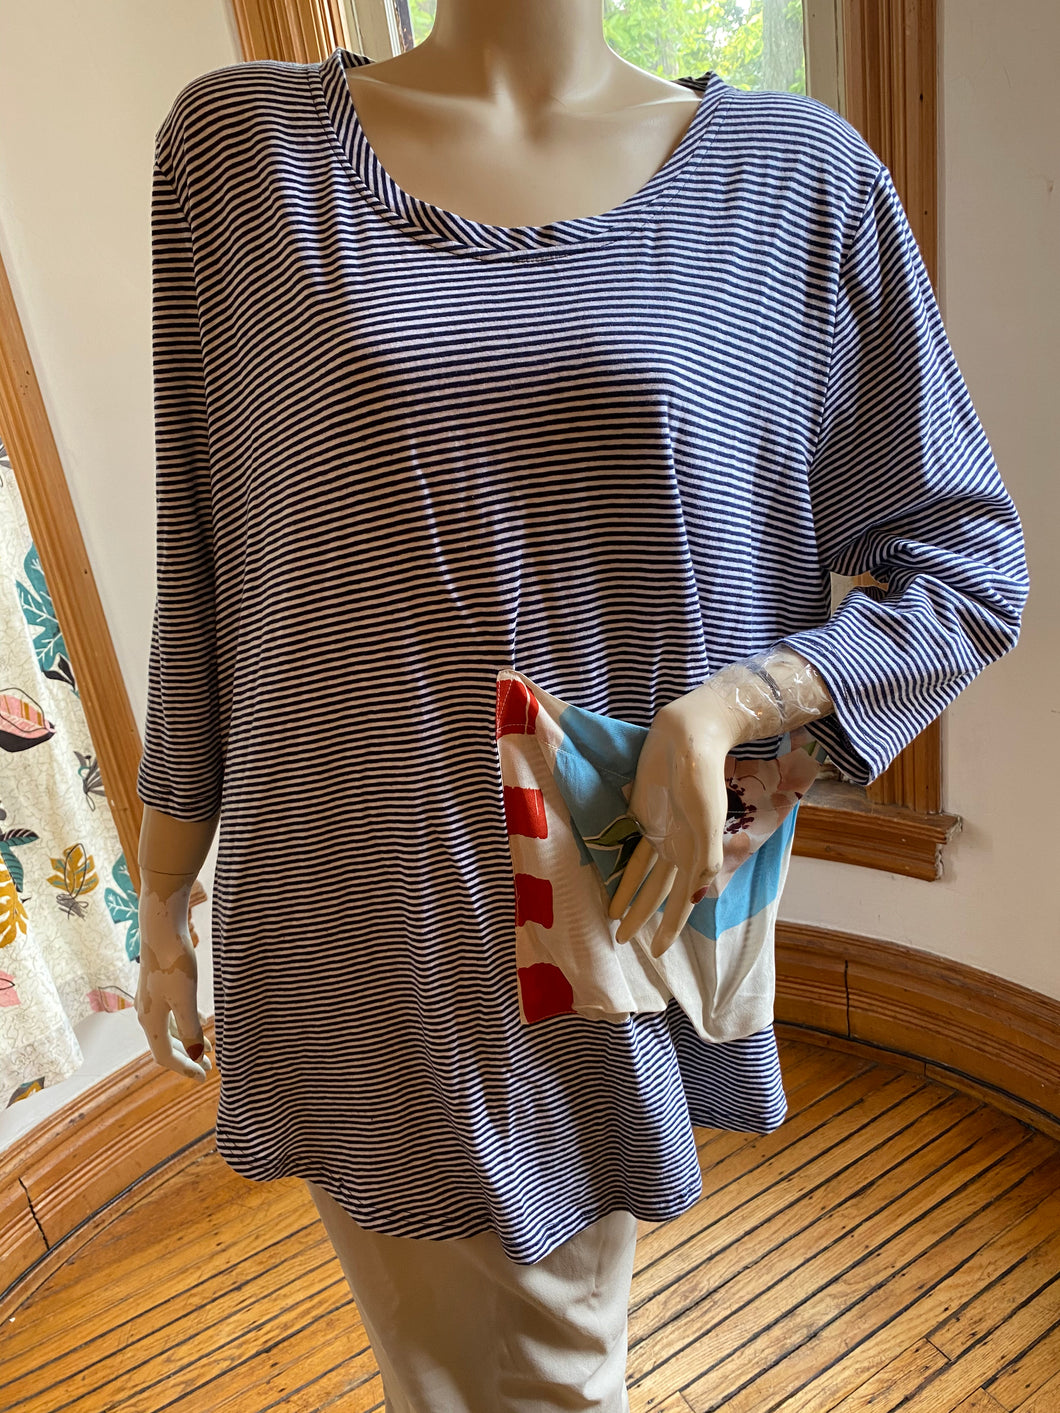 Alembika Navy Blue Striped Tunic Top with Contrast Floral Fabric Pocket, size M/L (Brand size 3)